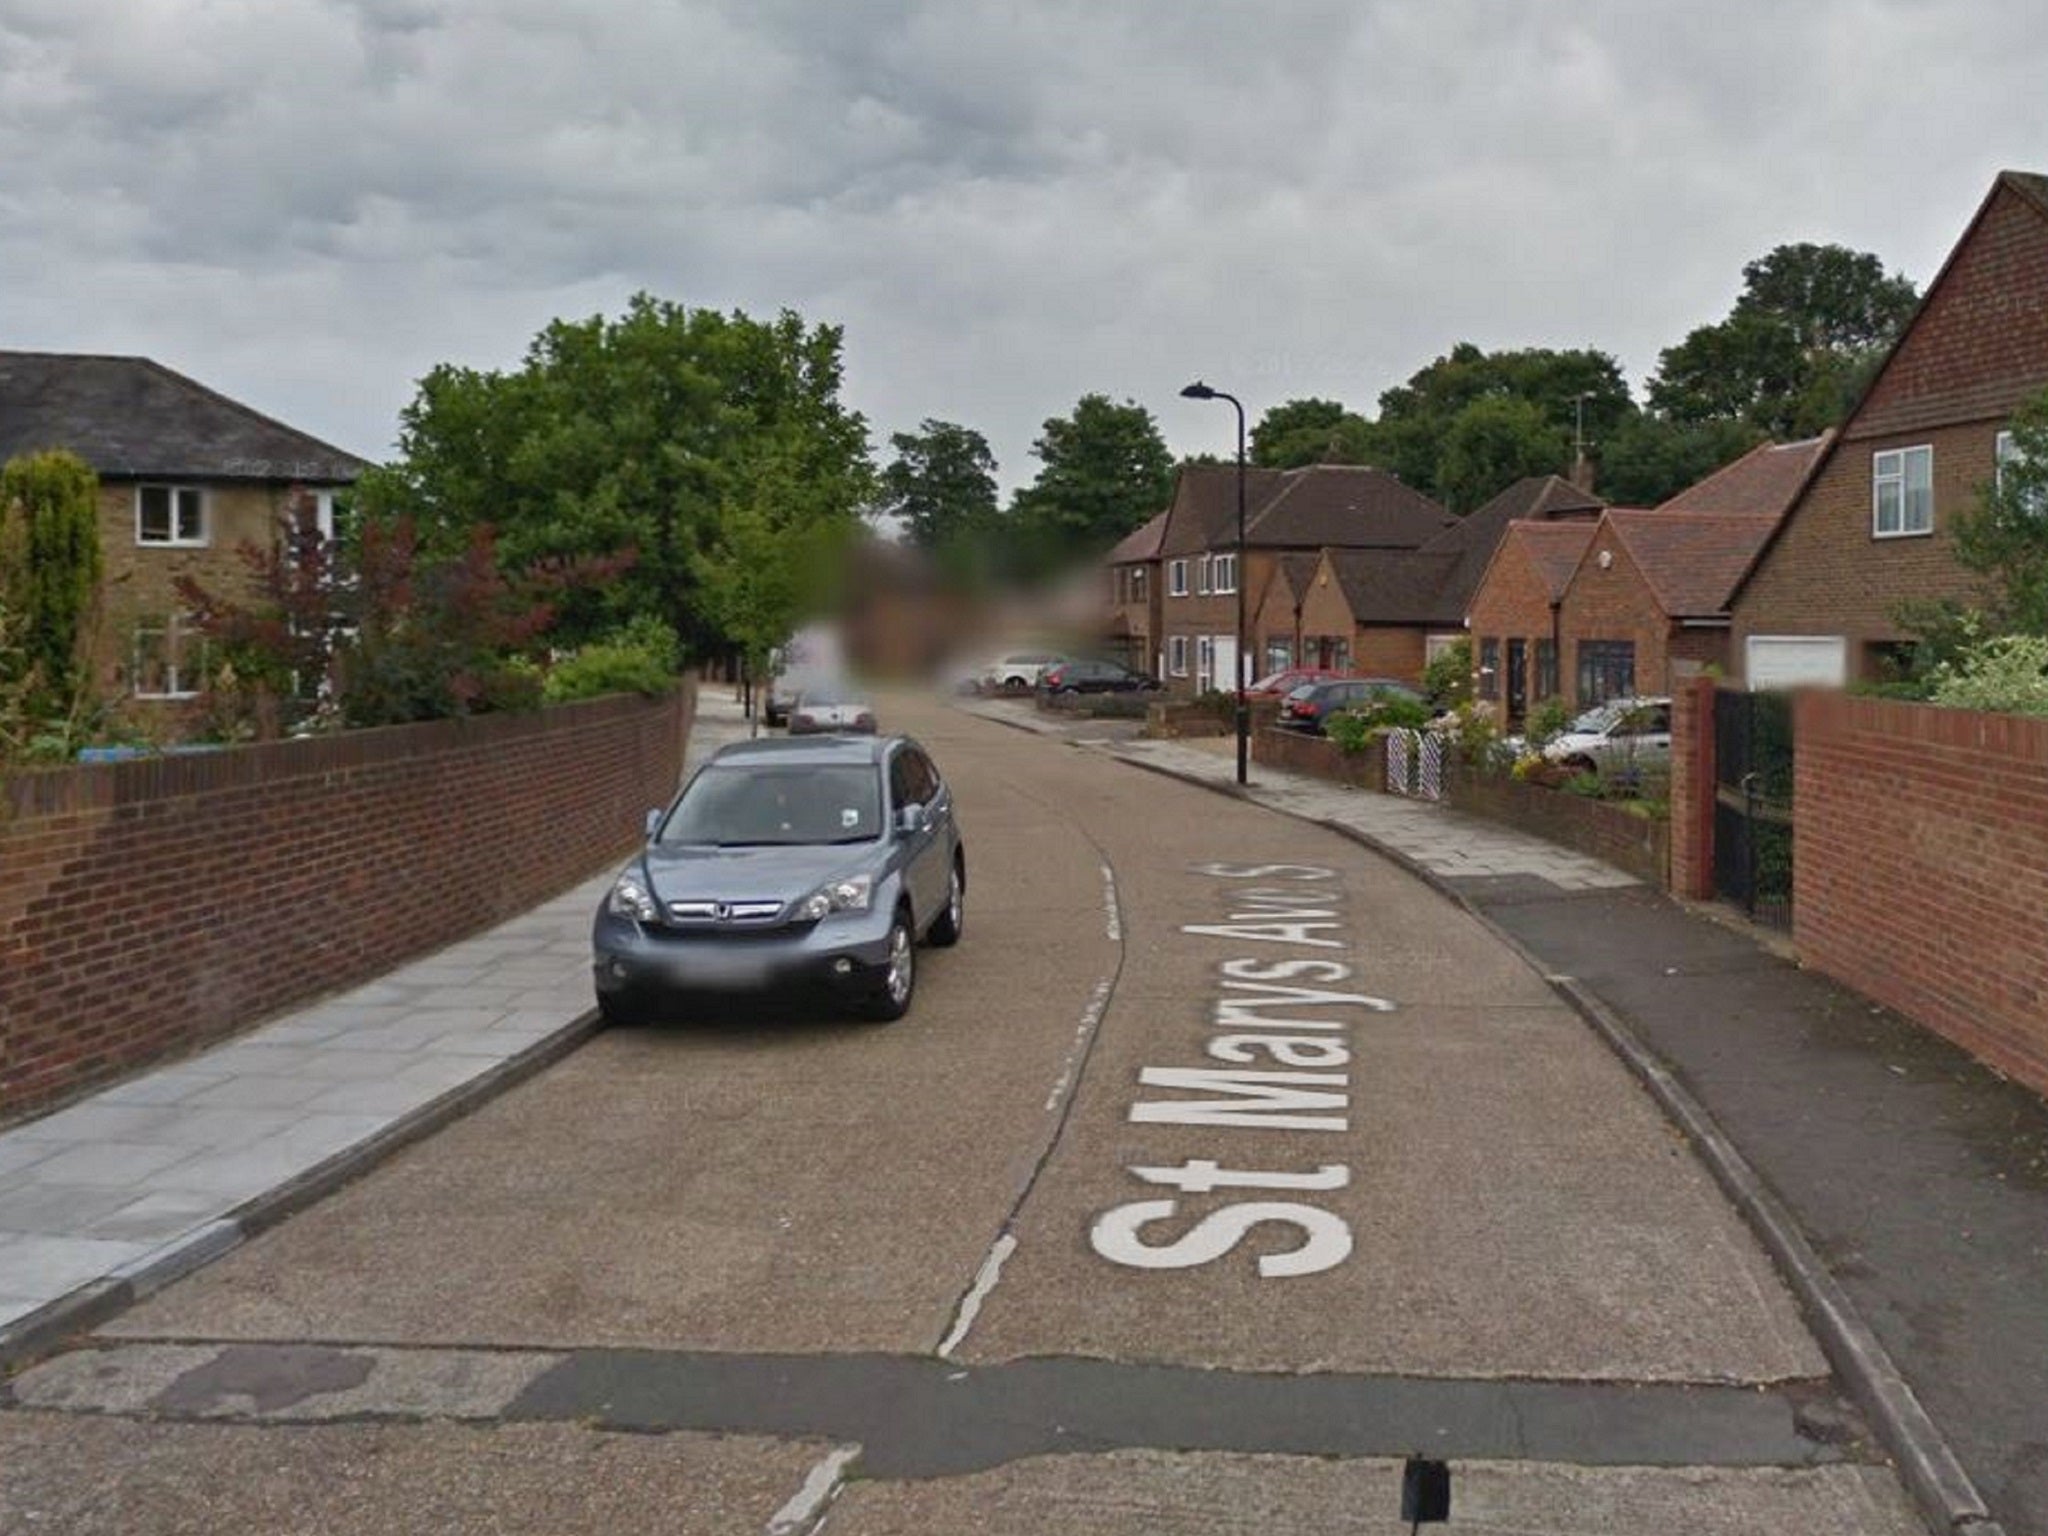 General view of St Mary's Avenue in Southall, Ealing, west London, where a man in his 60s was stabbed to death on 24 August 2019.